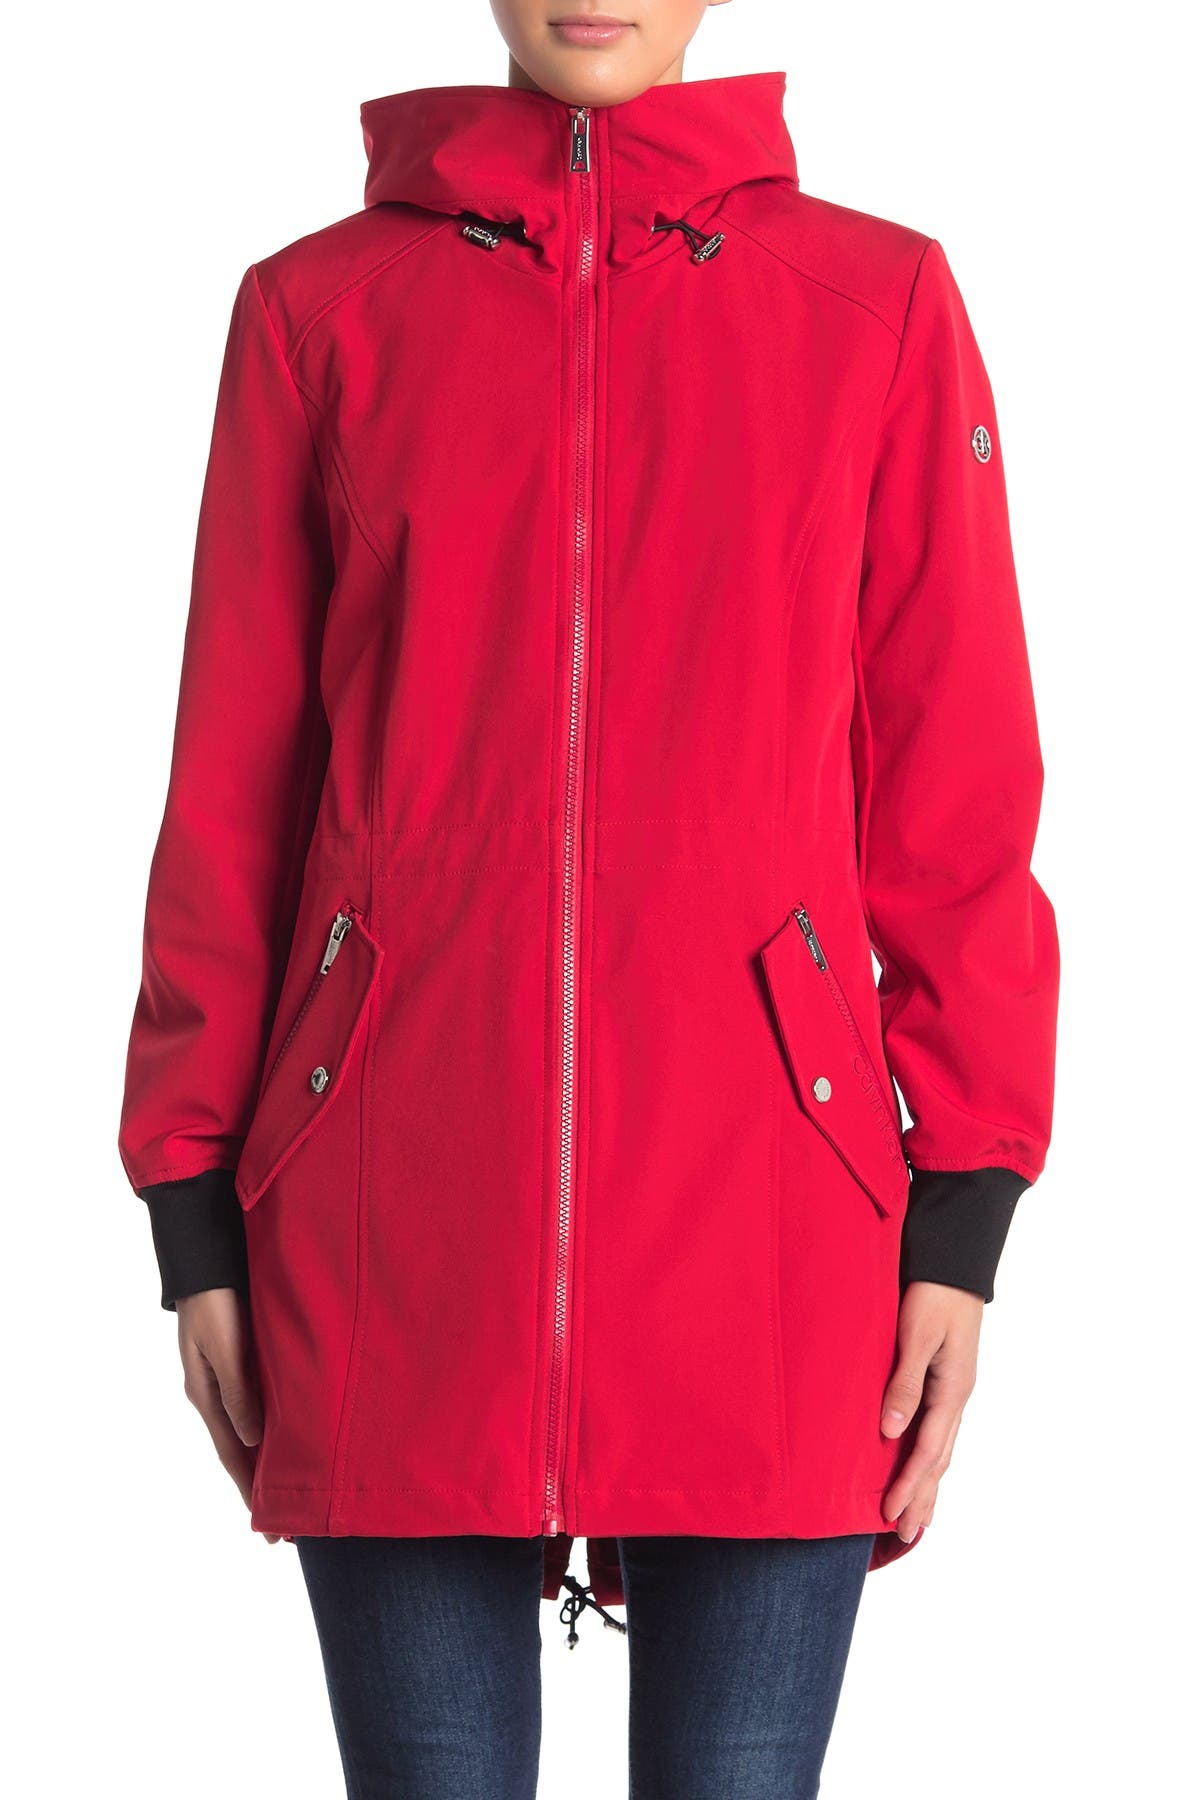 calvin klein water resistant breathable shell wind protection 4 way stretch